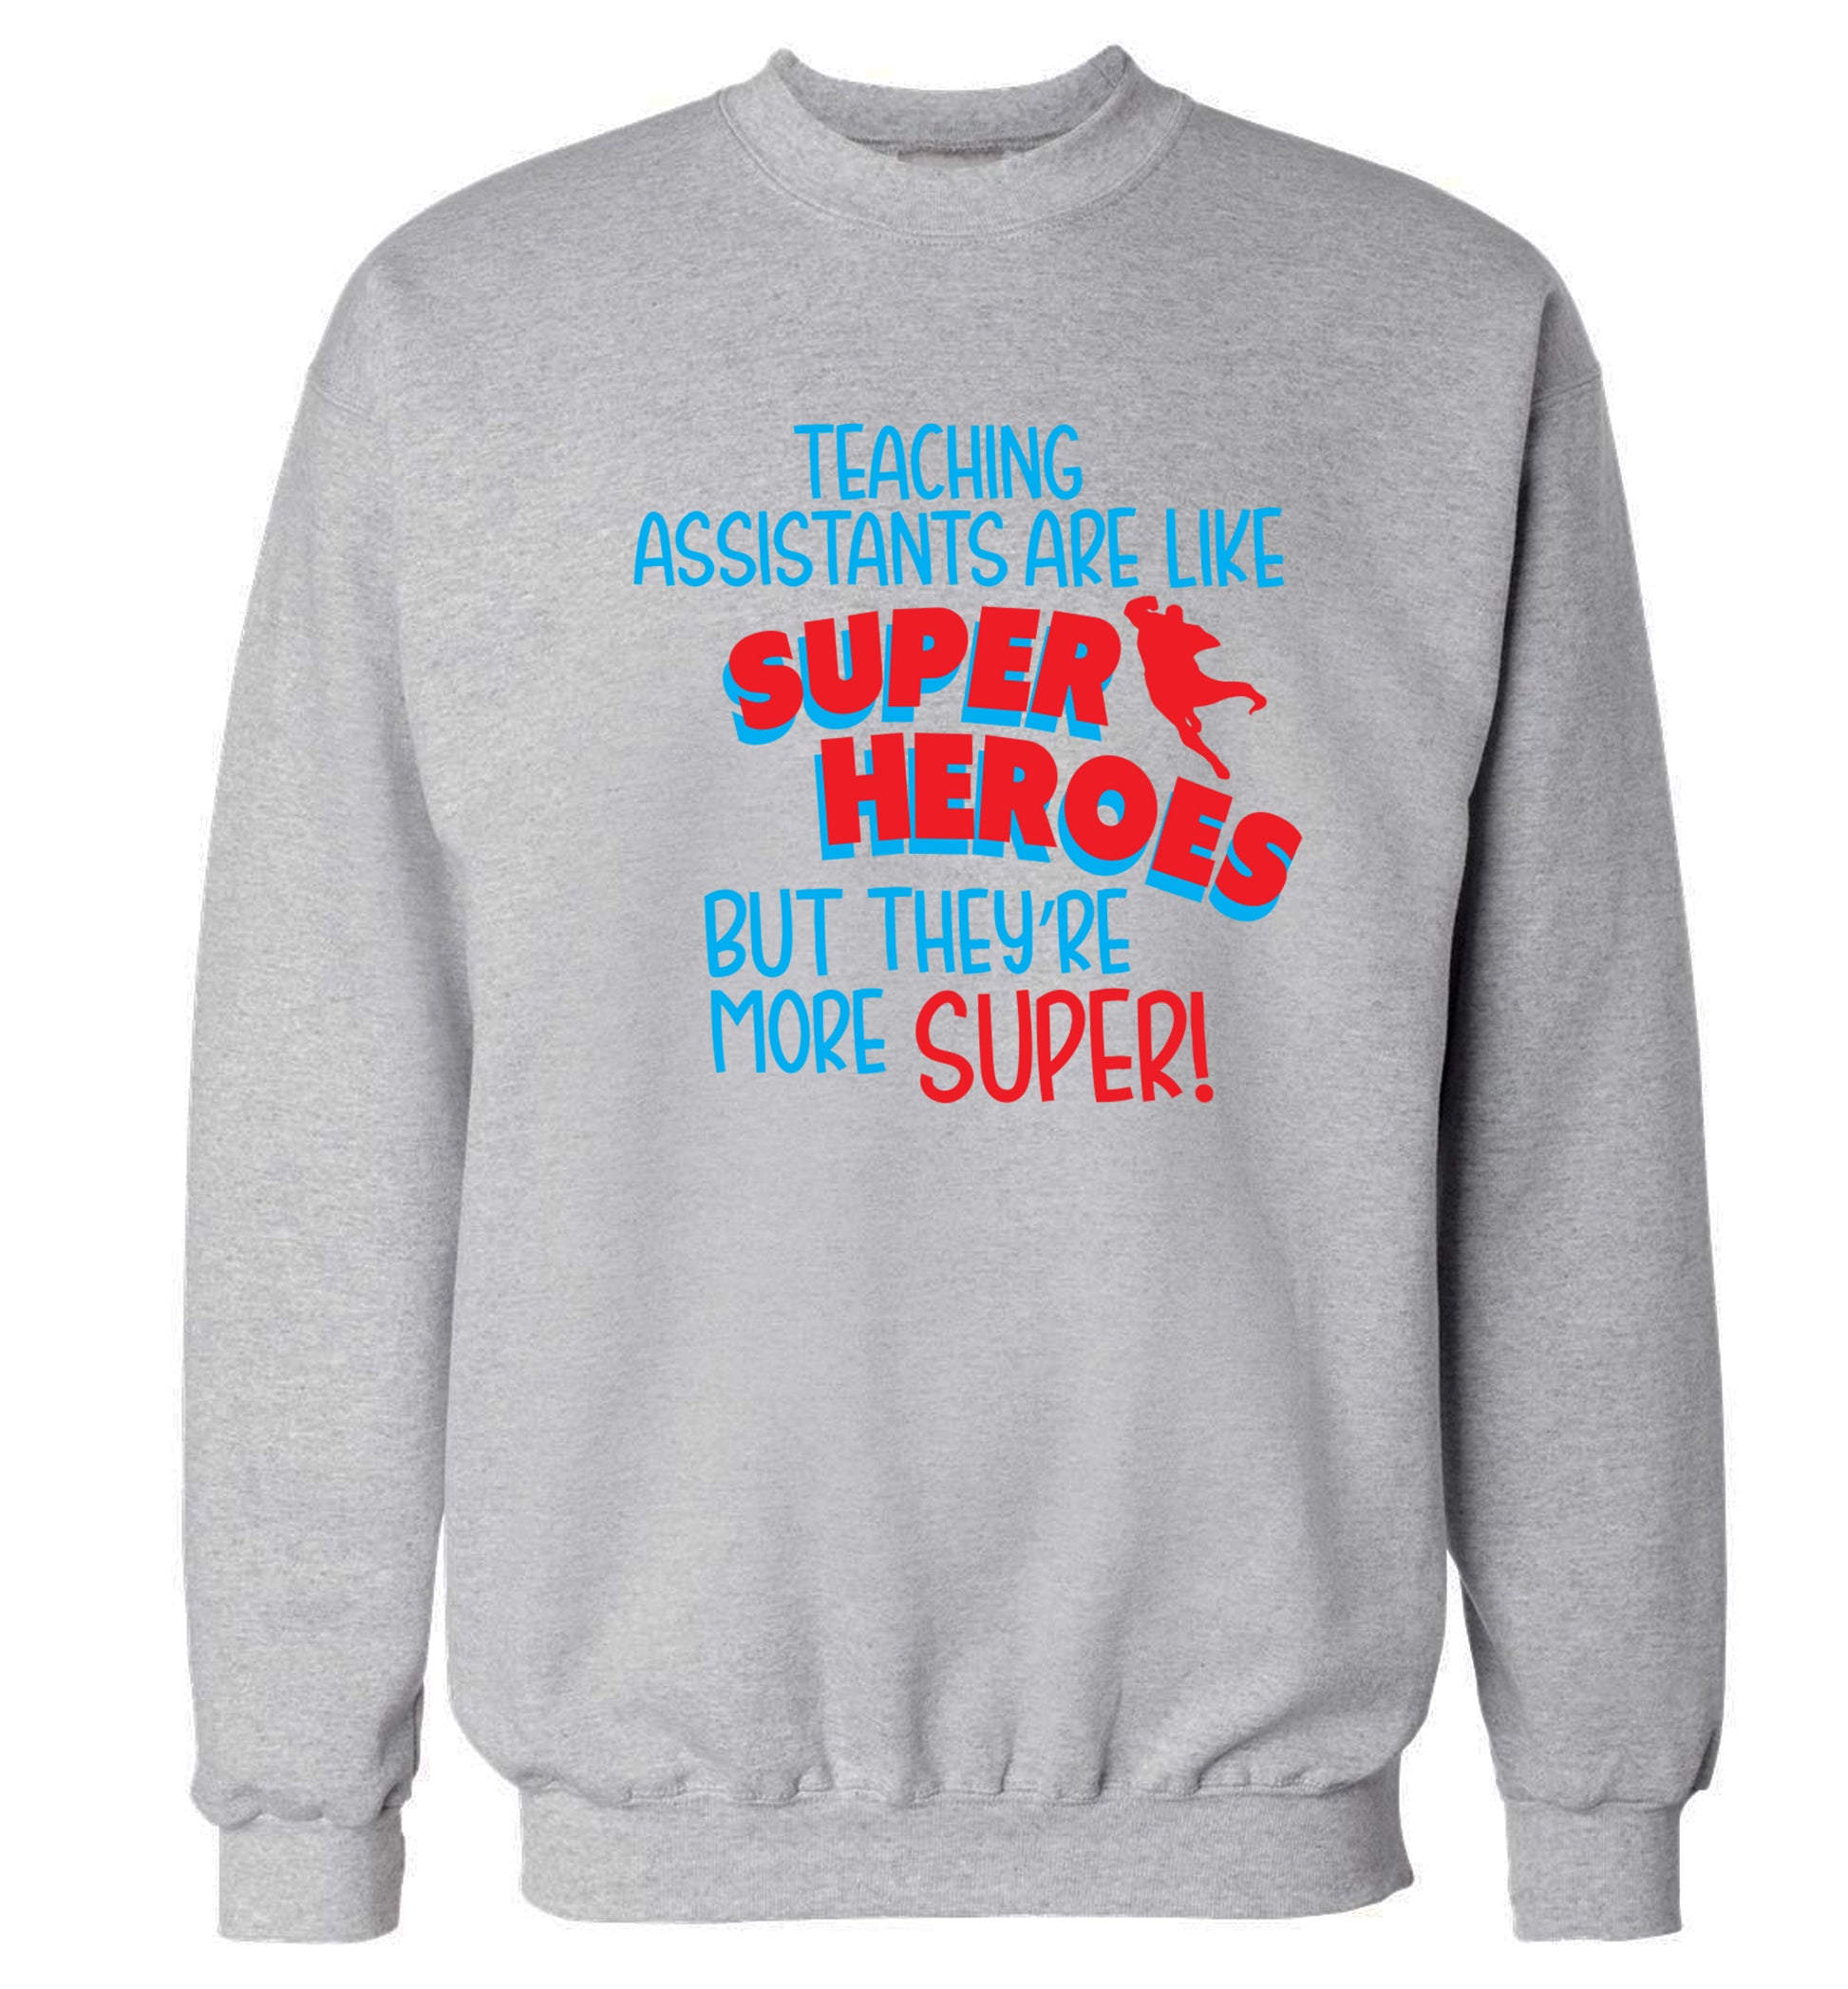 Teaching assistants are like superheros but they're more super Adult's unisex grey Sweater 2XL